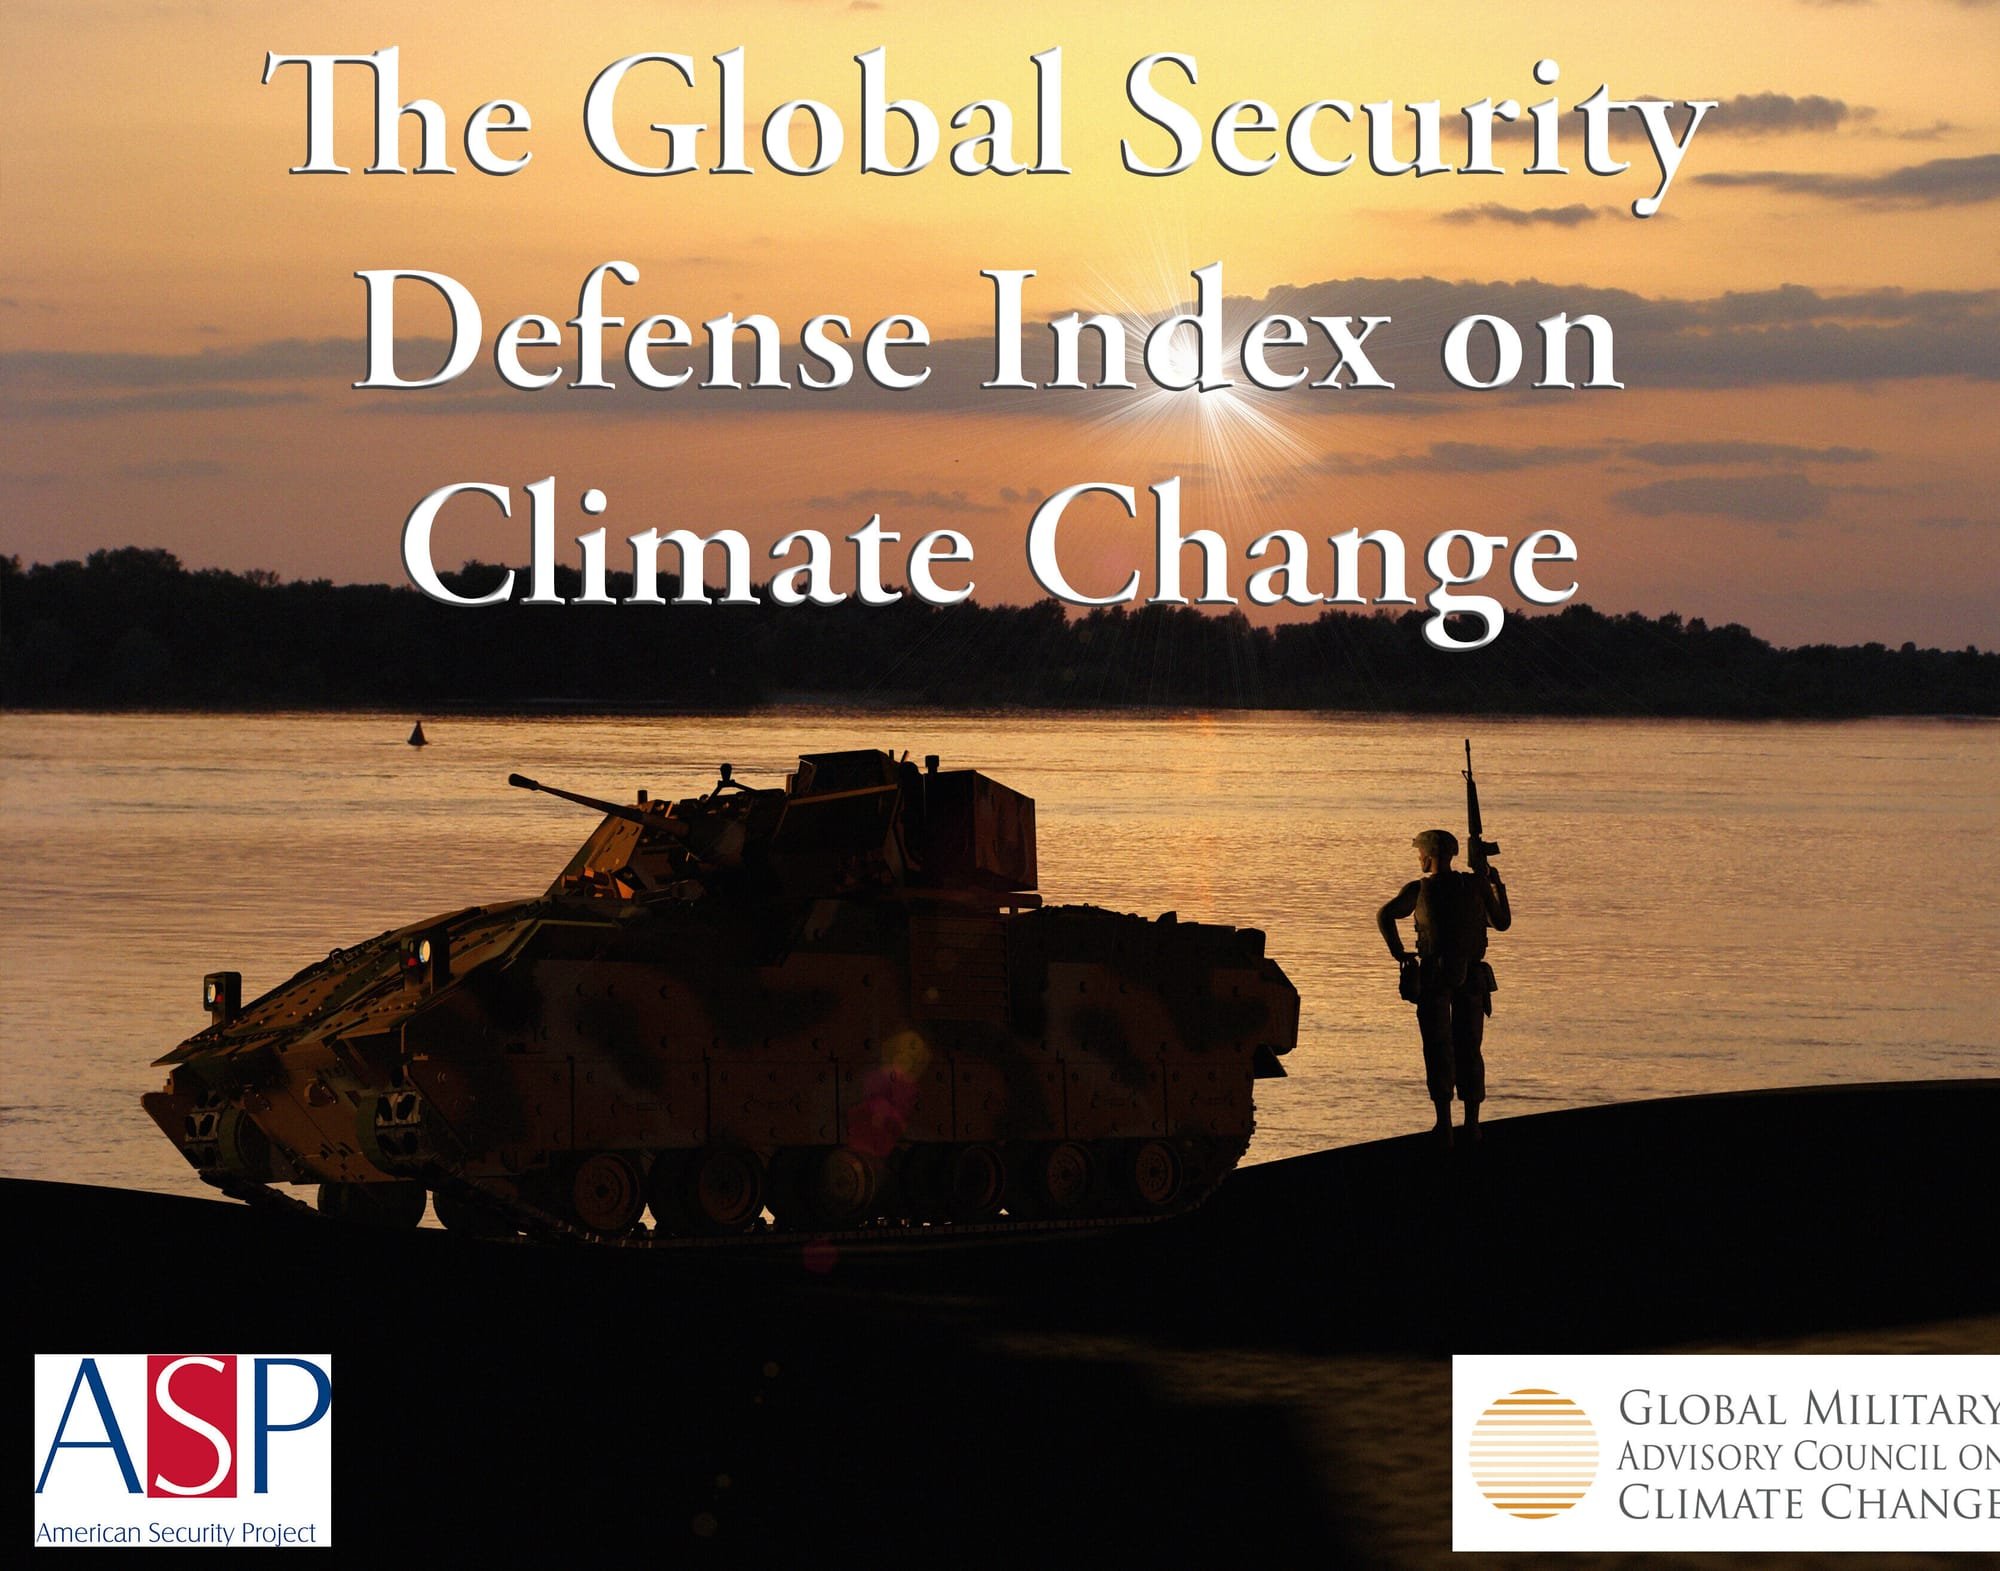 ASP launches Global Security Defense Index on Climate Change